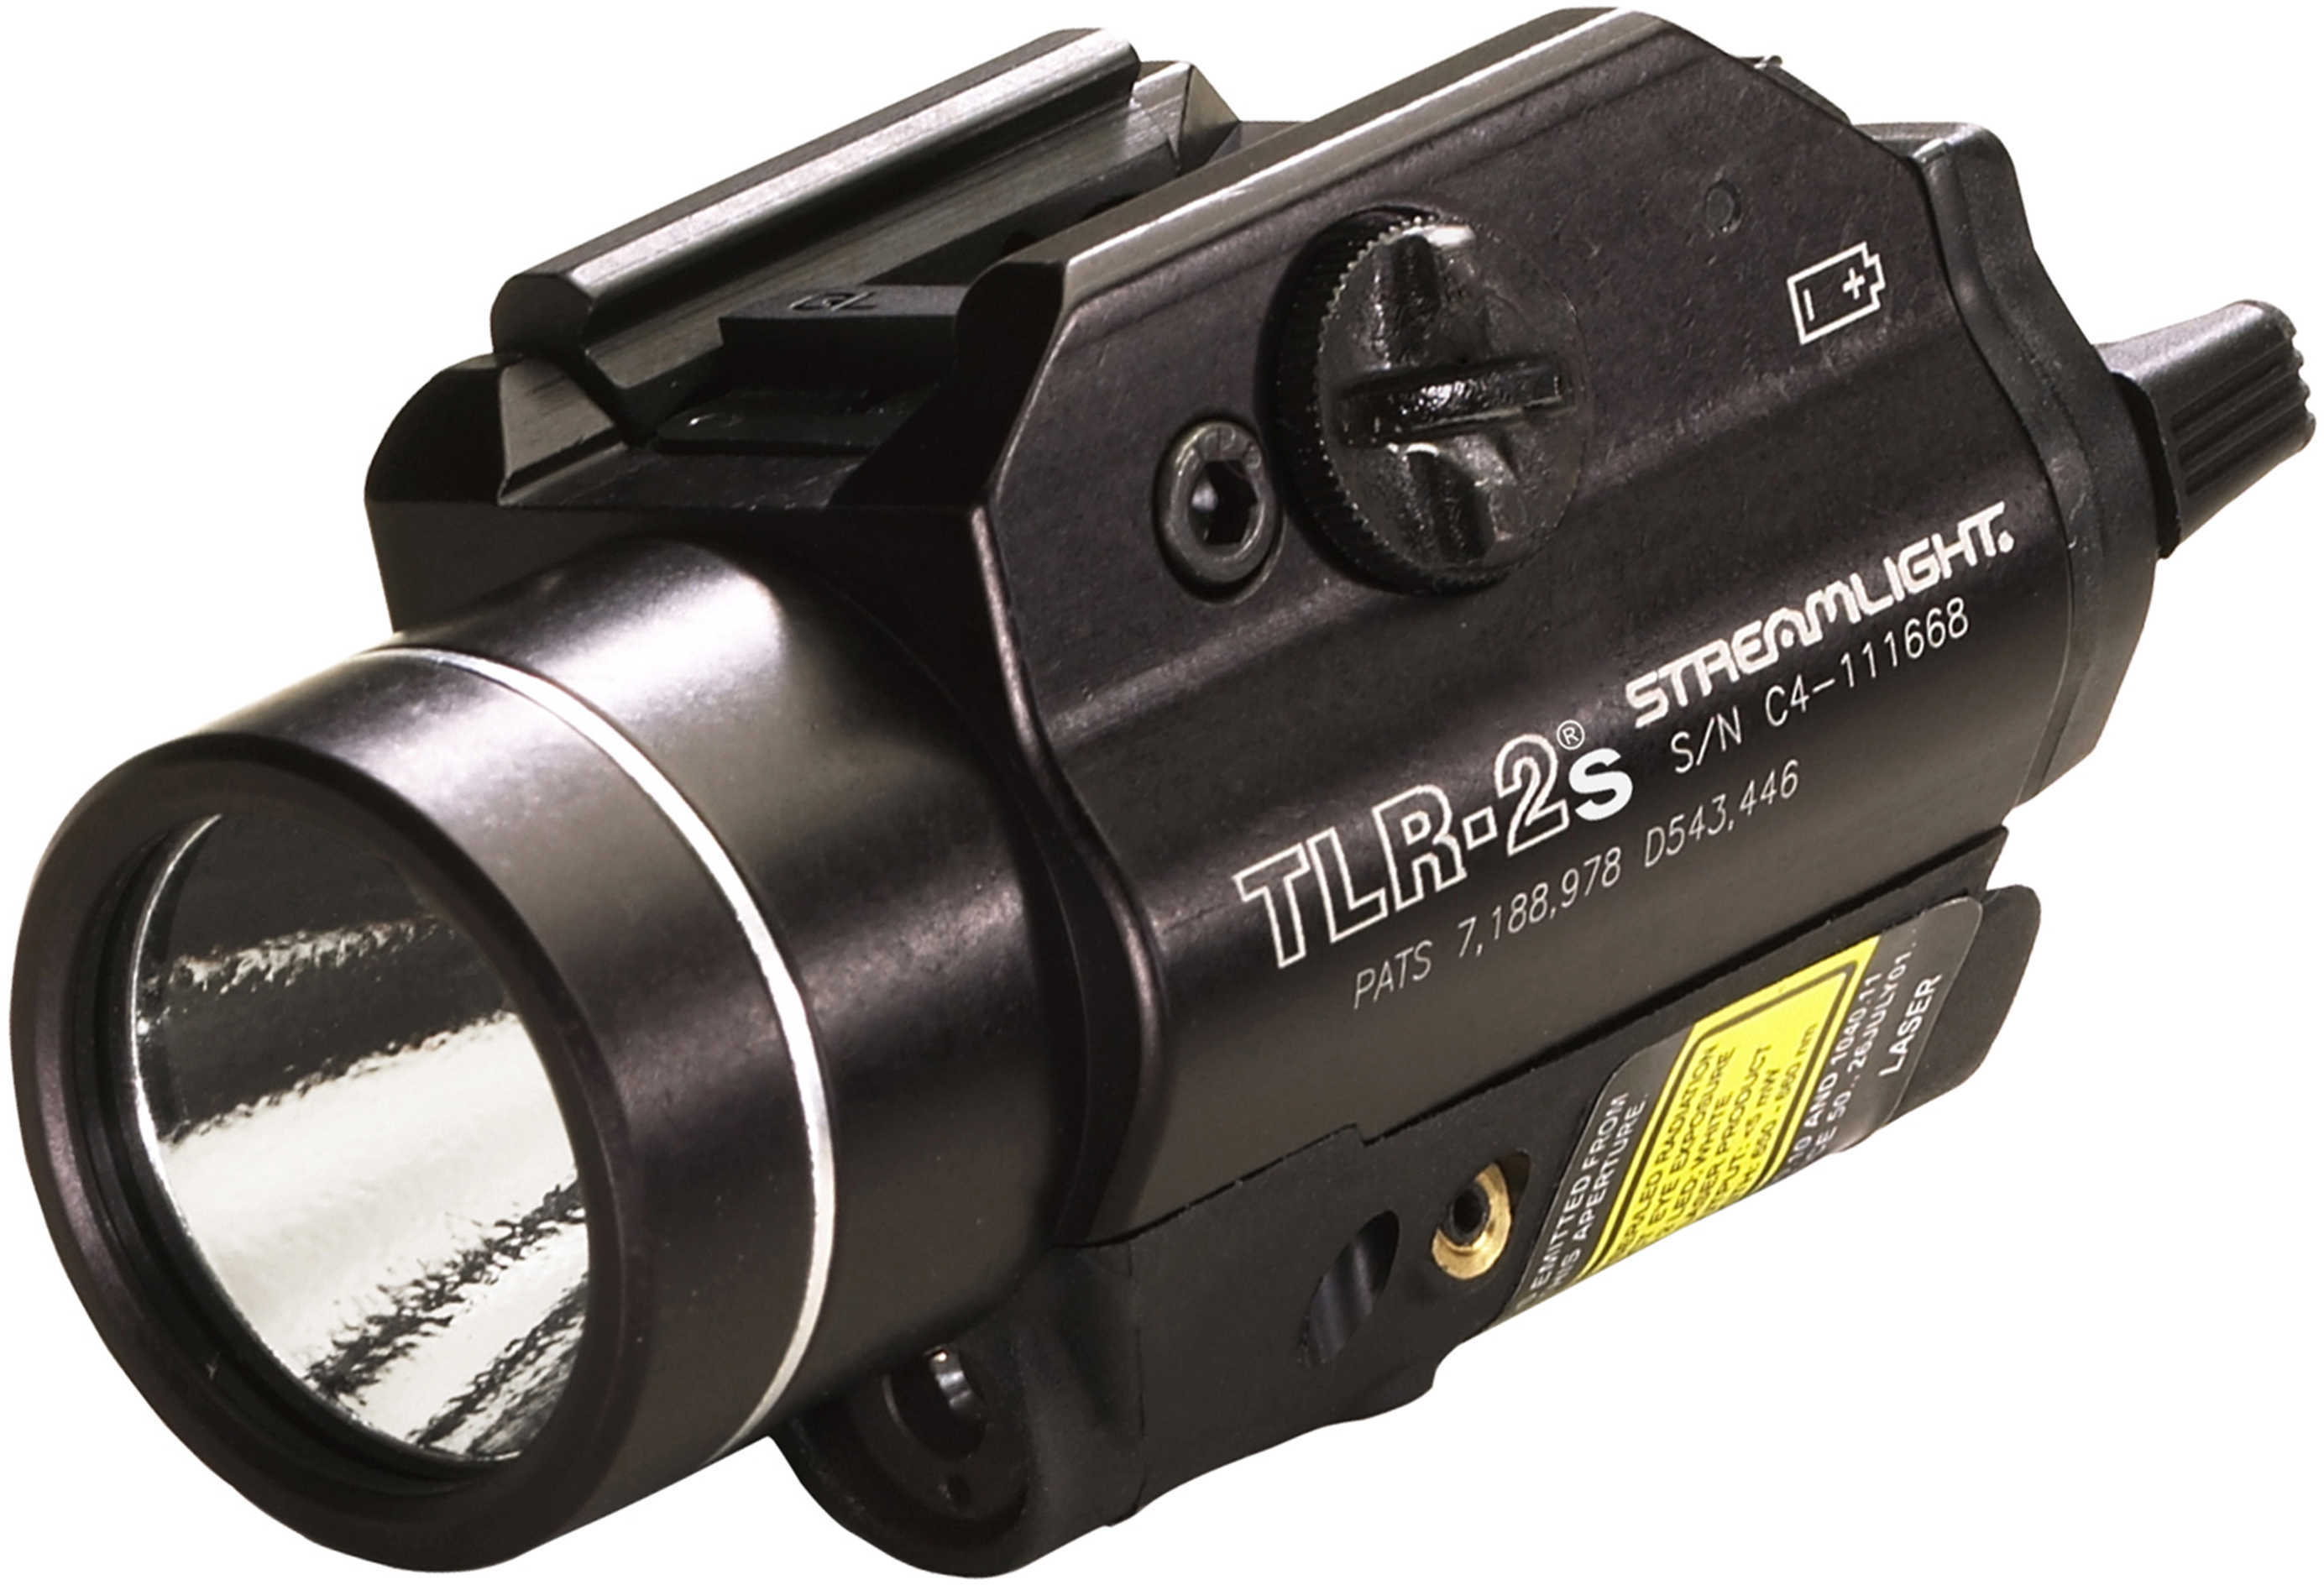 Streamlight TLR-1S With Laser - C4 Led W/160 Lumen Output Strobe Model W/User Programmable Enable/Disable Run